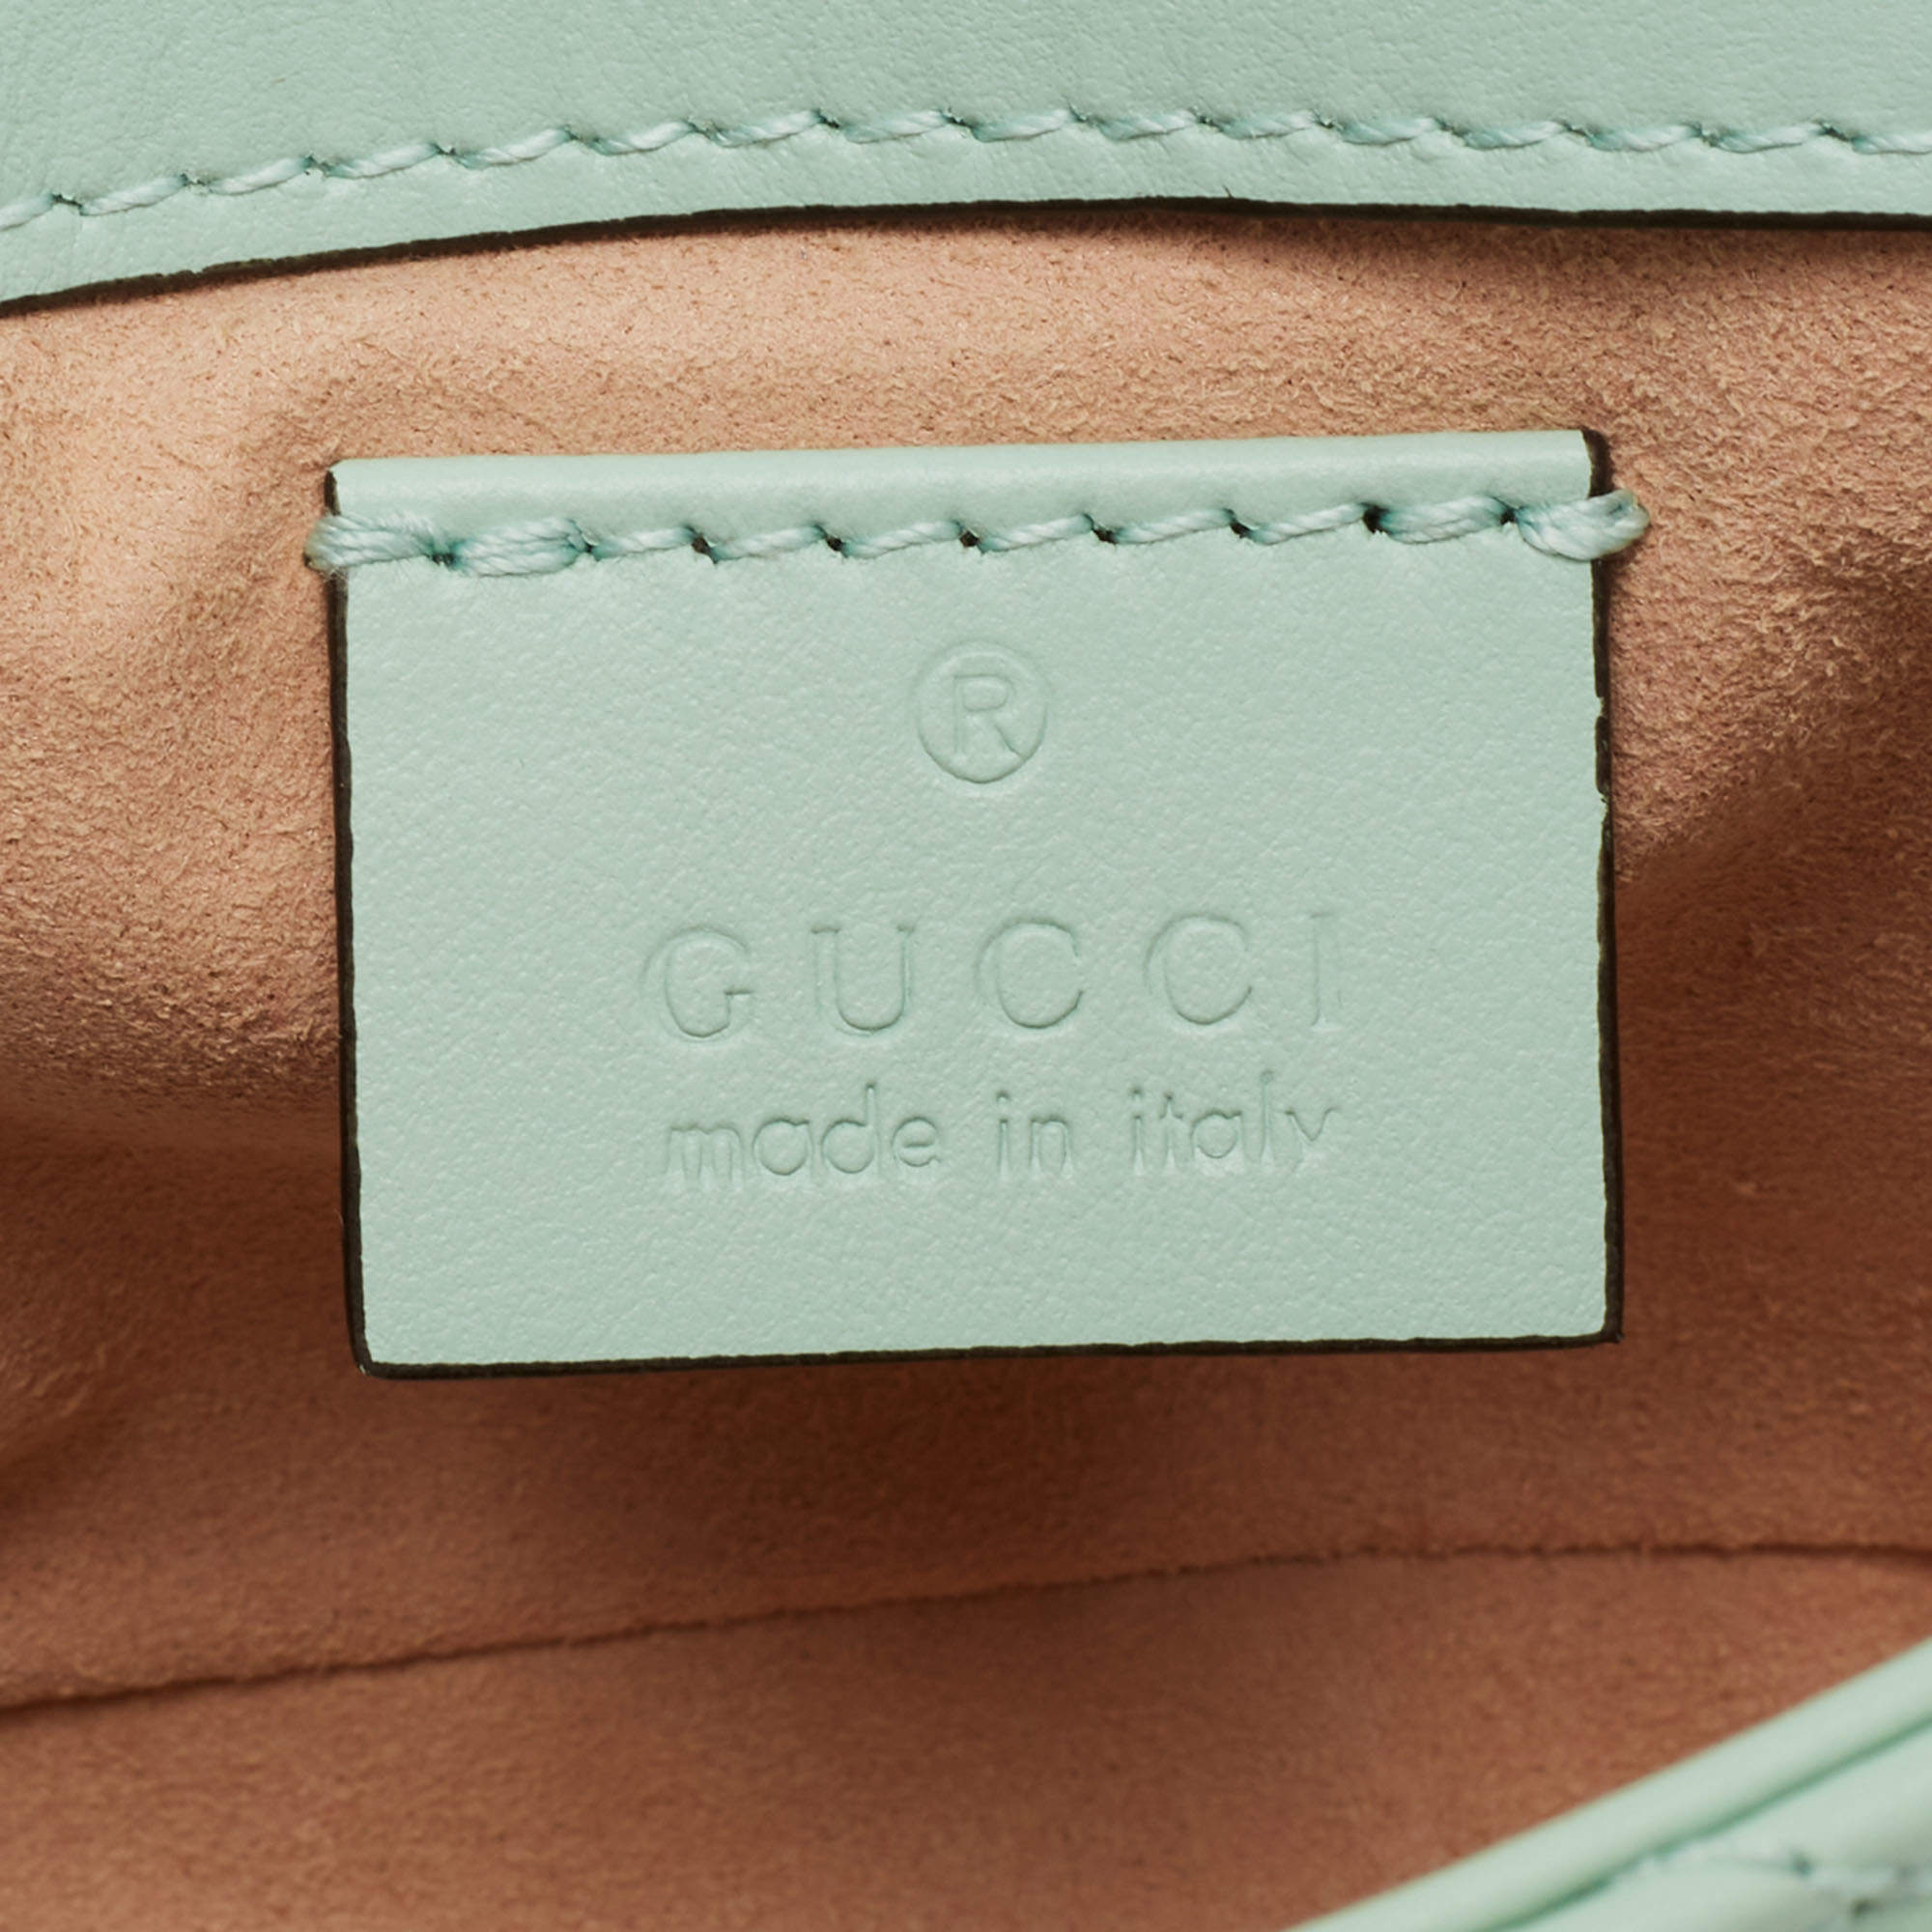 Gg marmont leather crossbody bag Gucci Green in Leather - 21449784